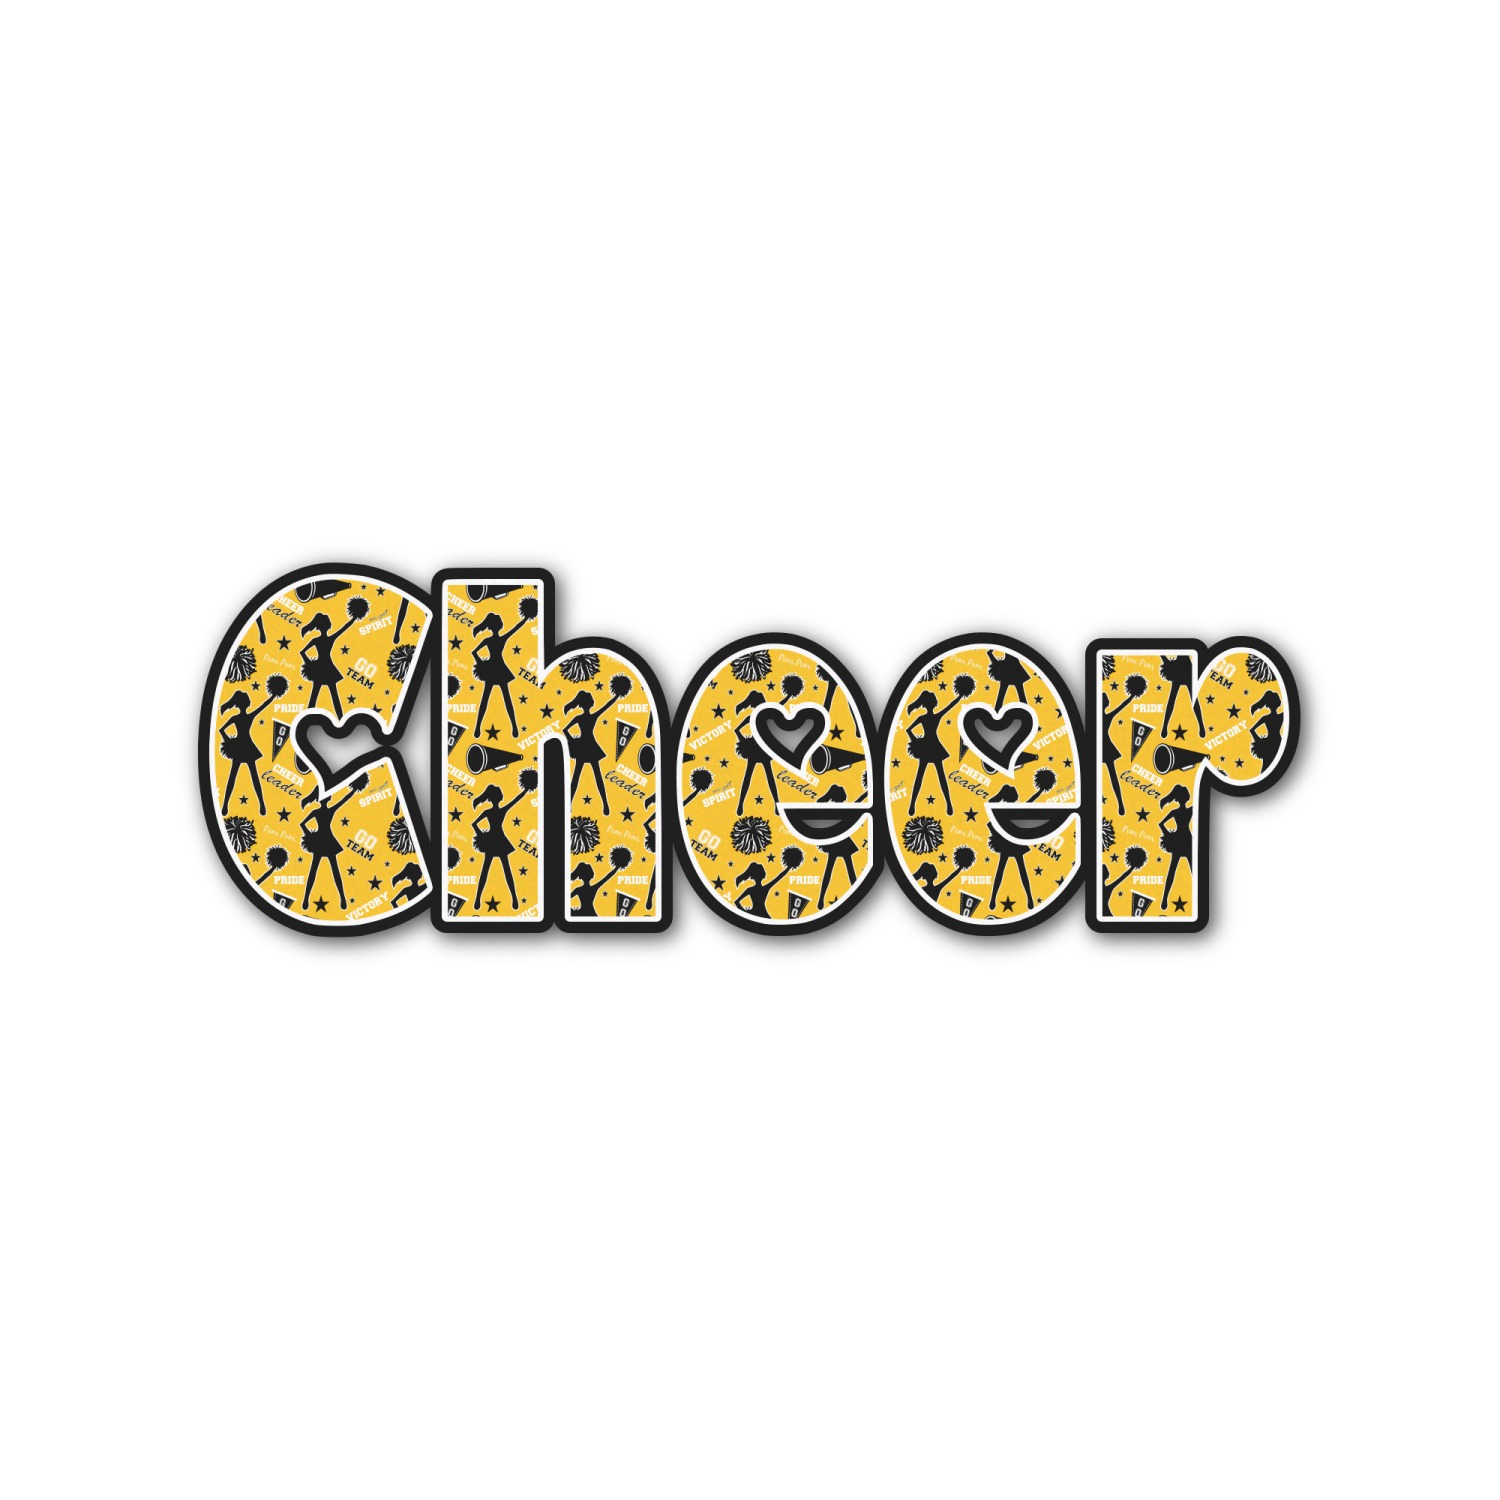 Personalized Cheerleading Stickers